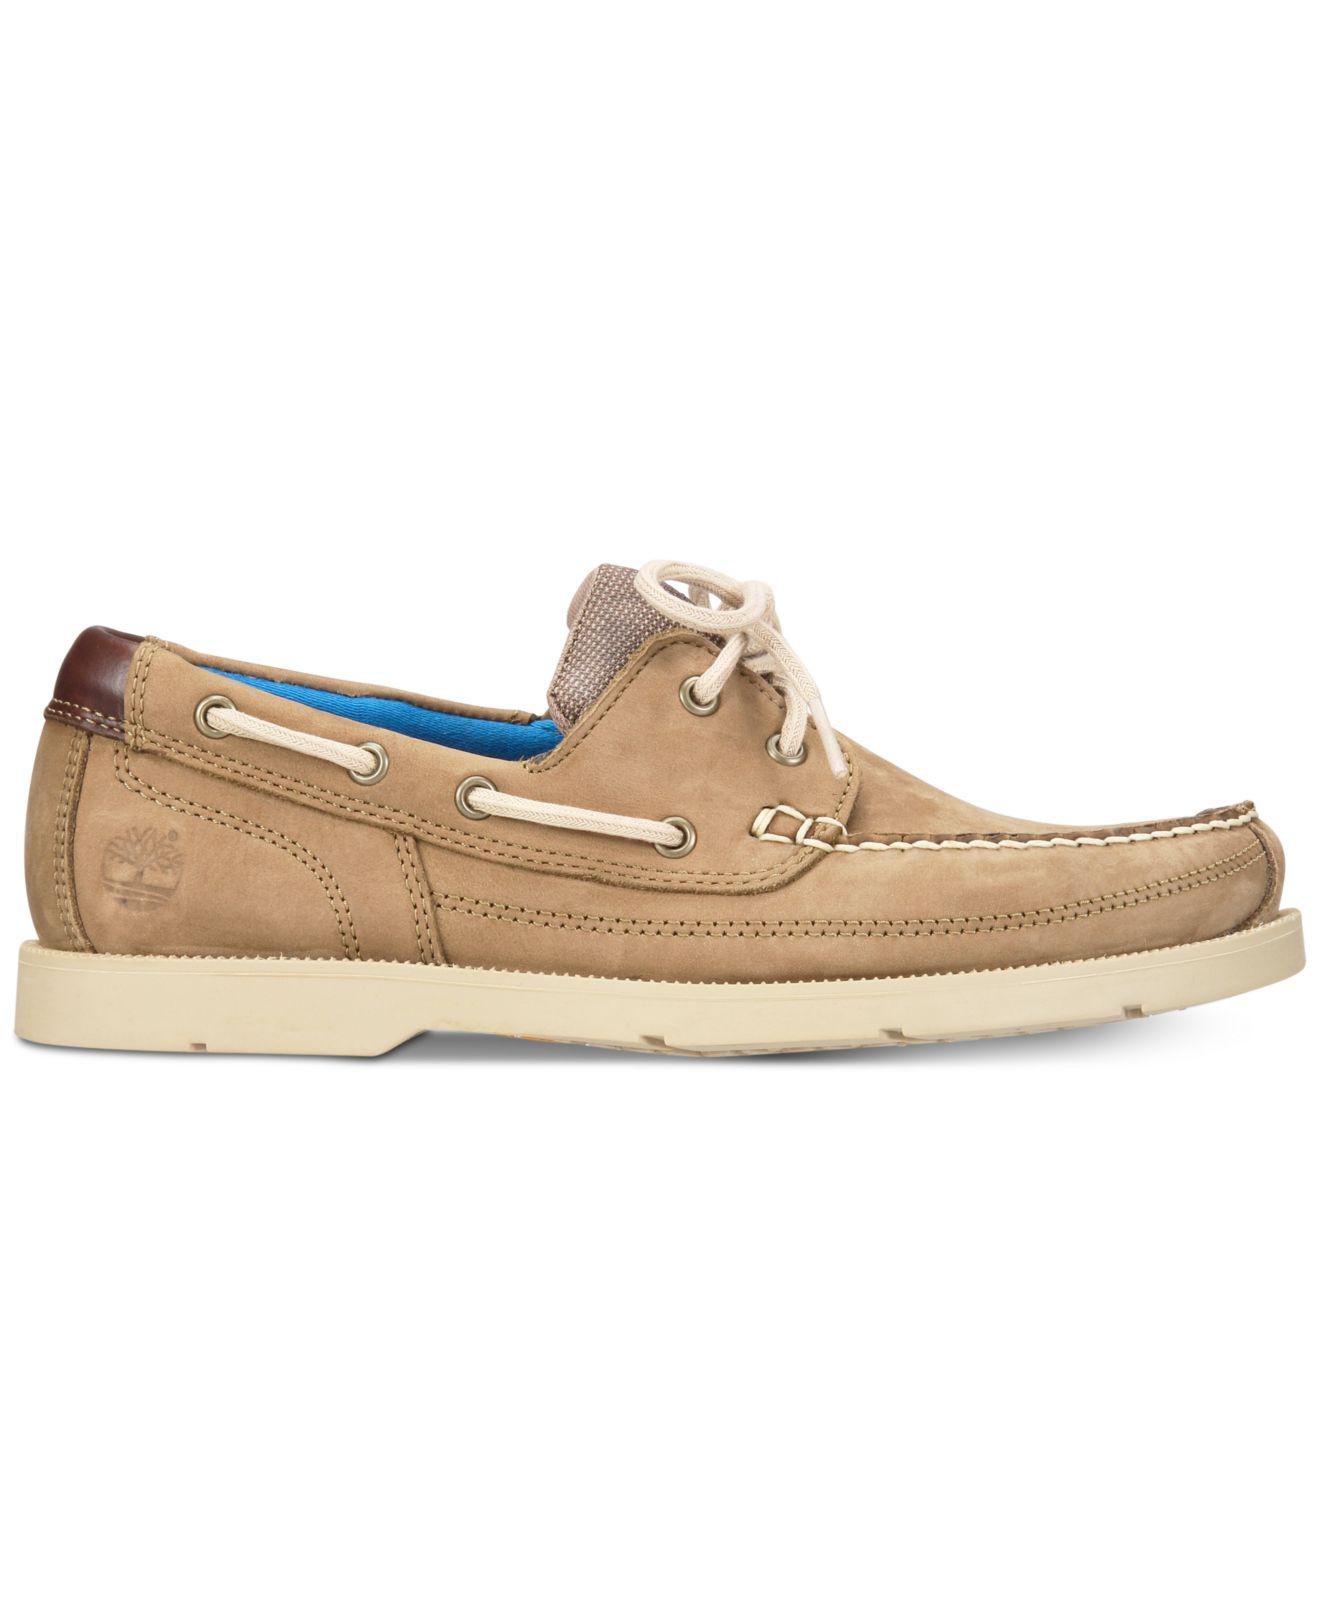 timberland men's piper cove boat shoes